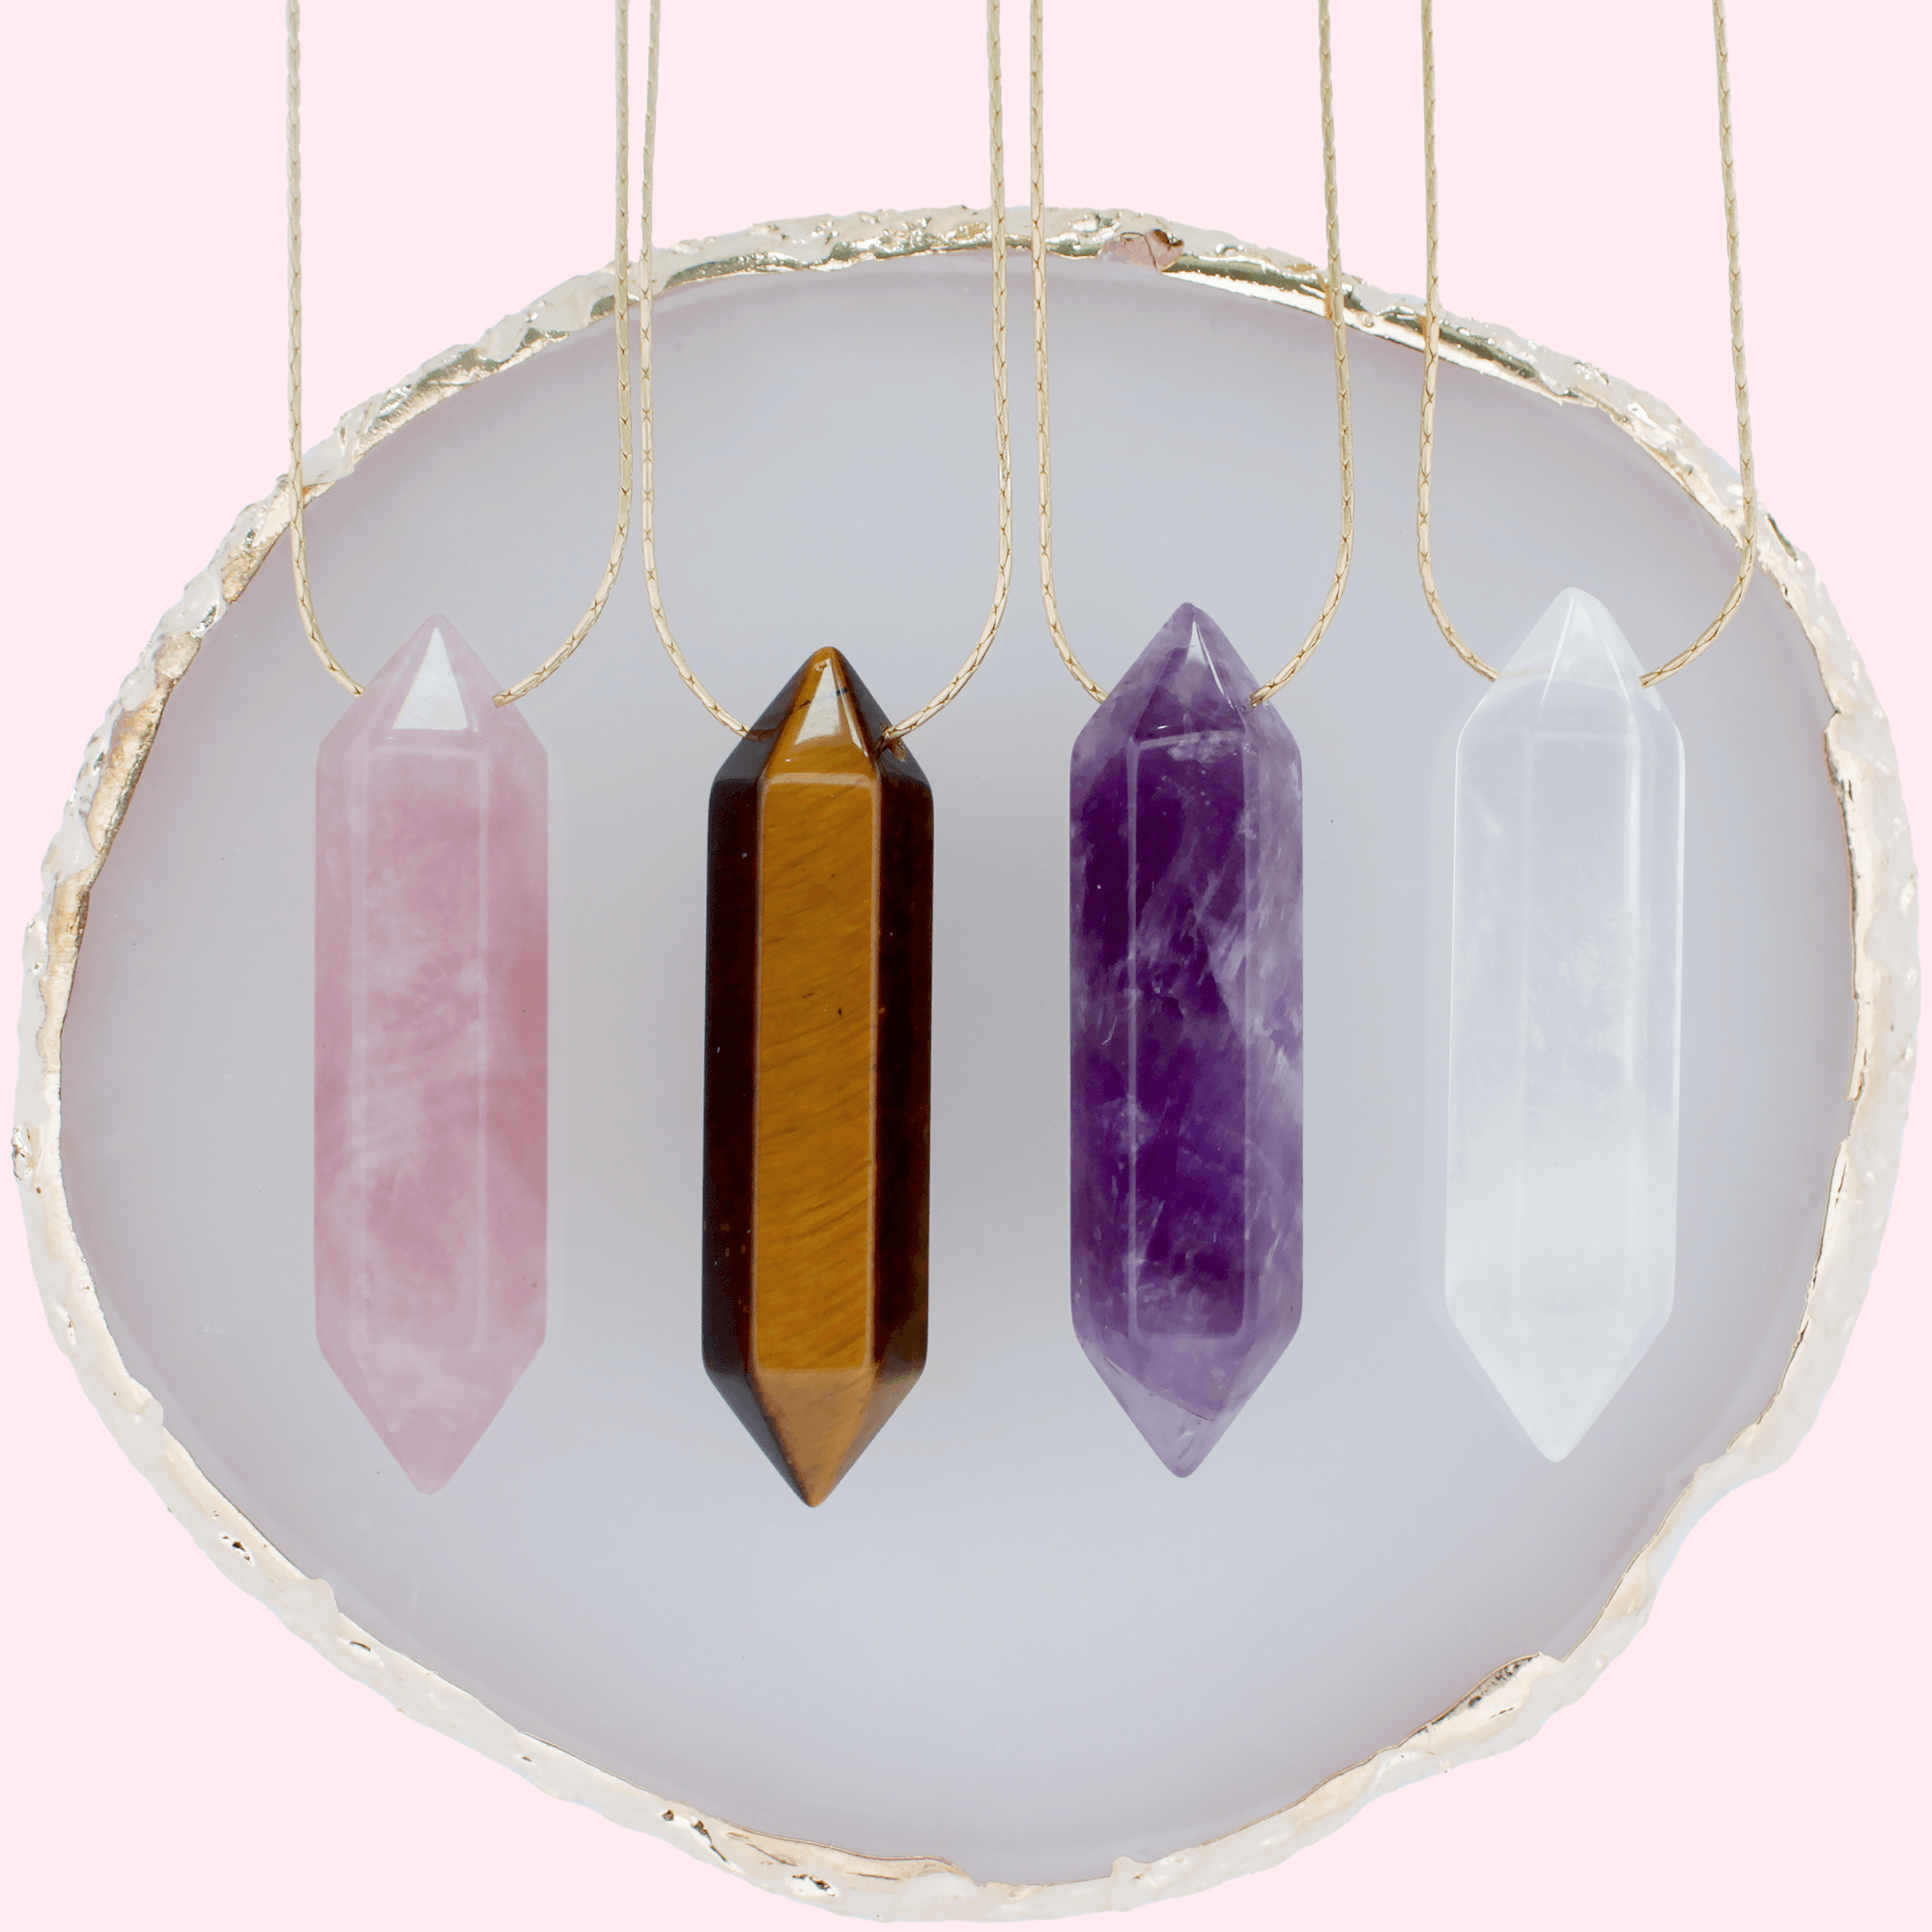 Dengmore Wrapped Crystal Point Pendant Necklace Reiki Healing Crystals  Stone Necklaces Gemstone Quartz Jewelry for Women - Walmart.com